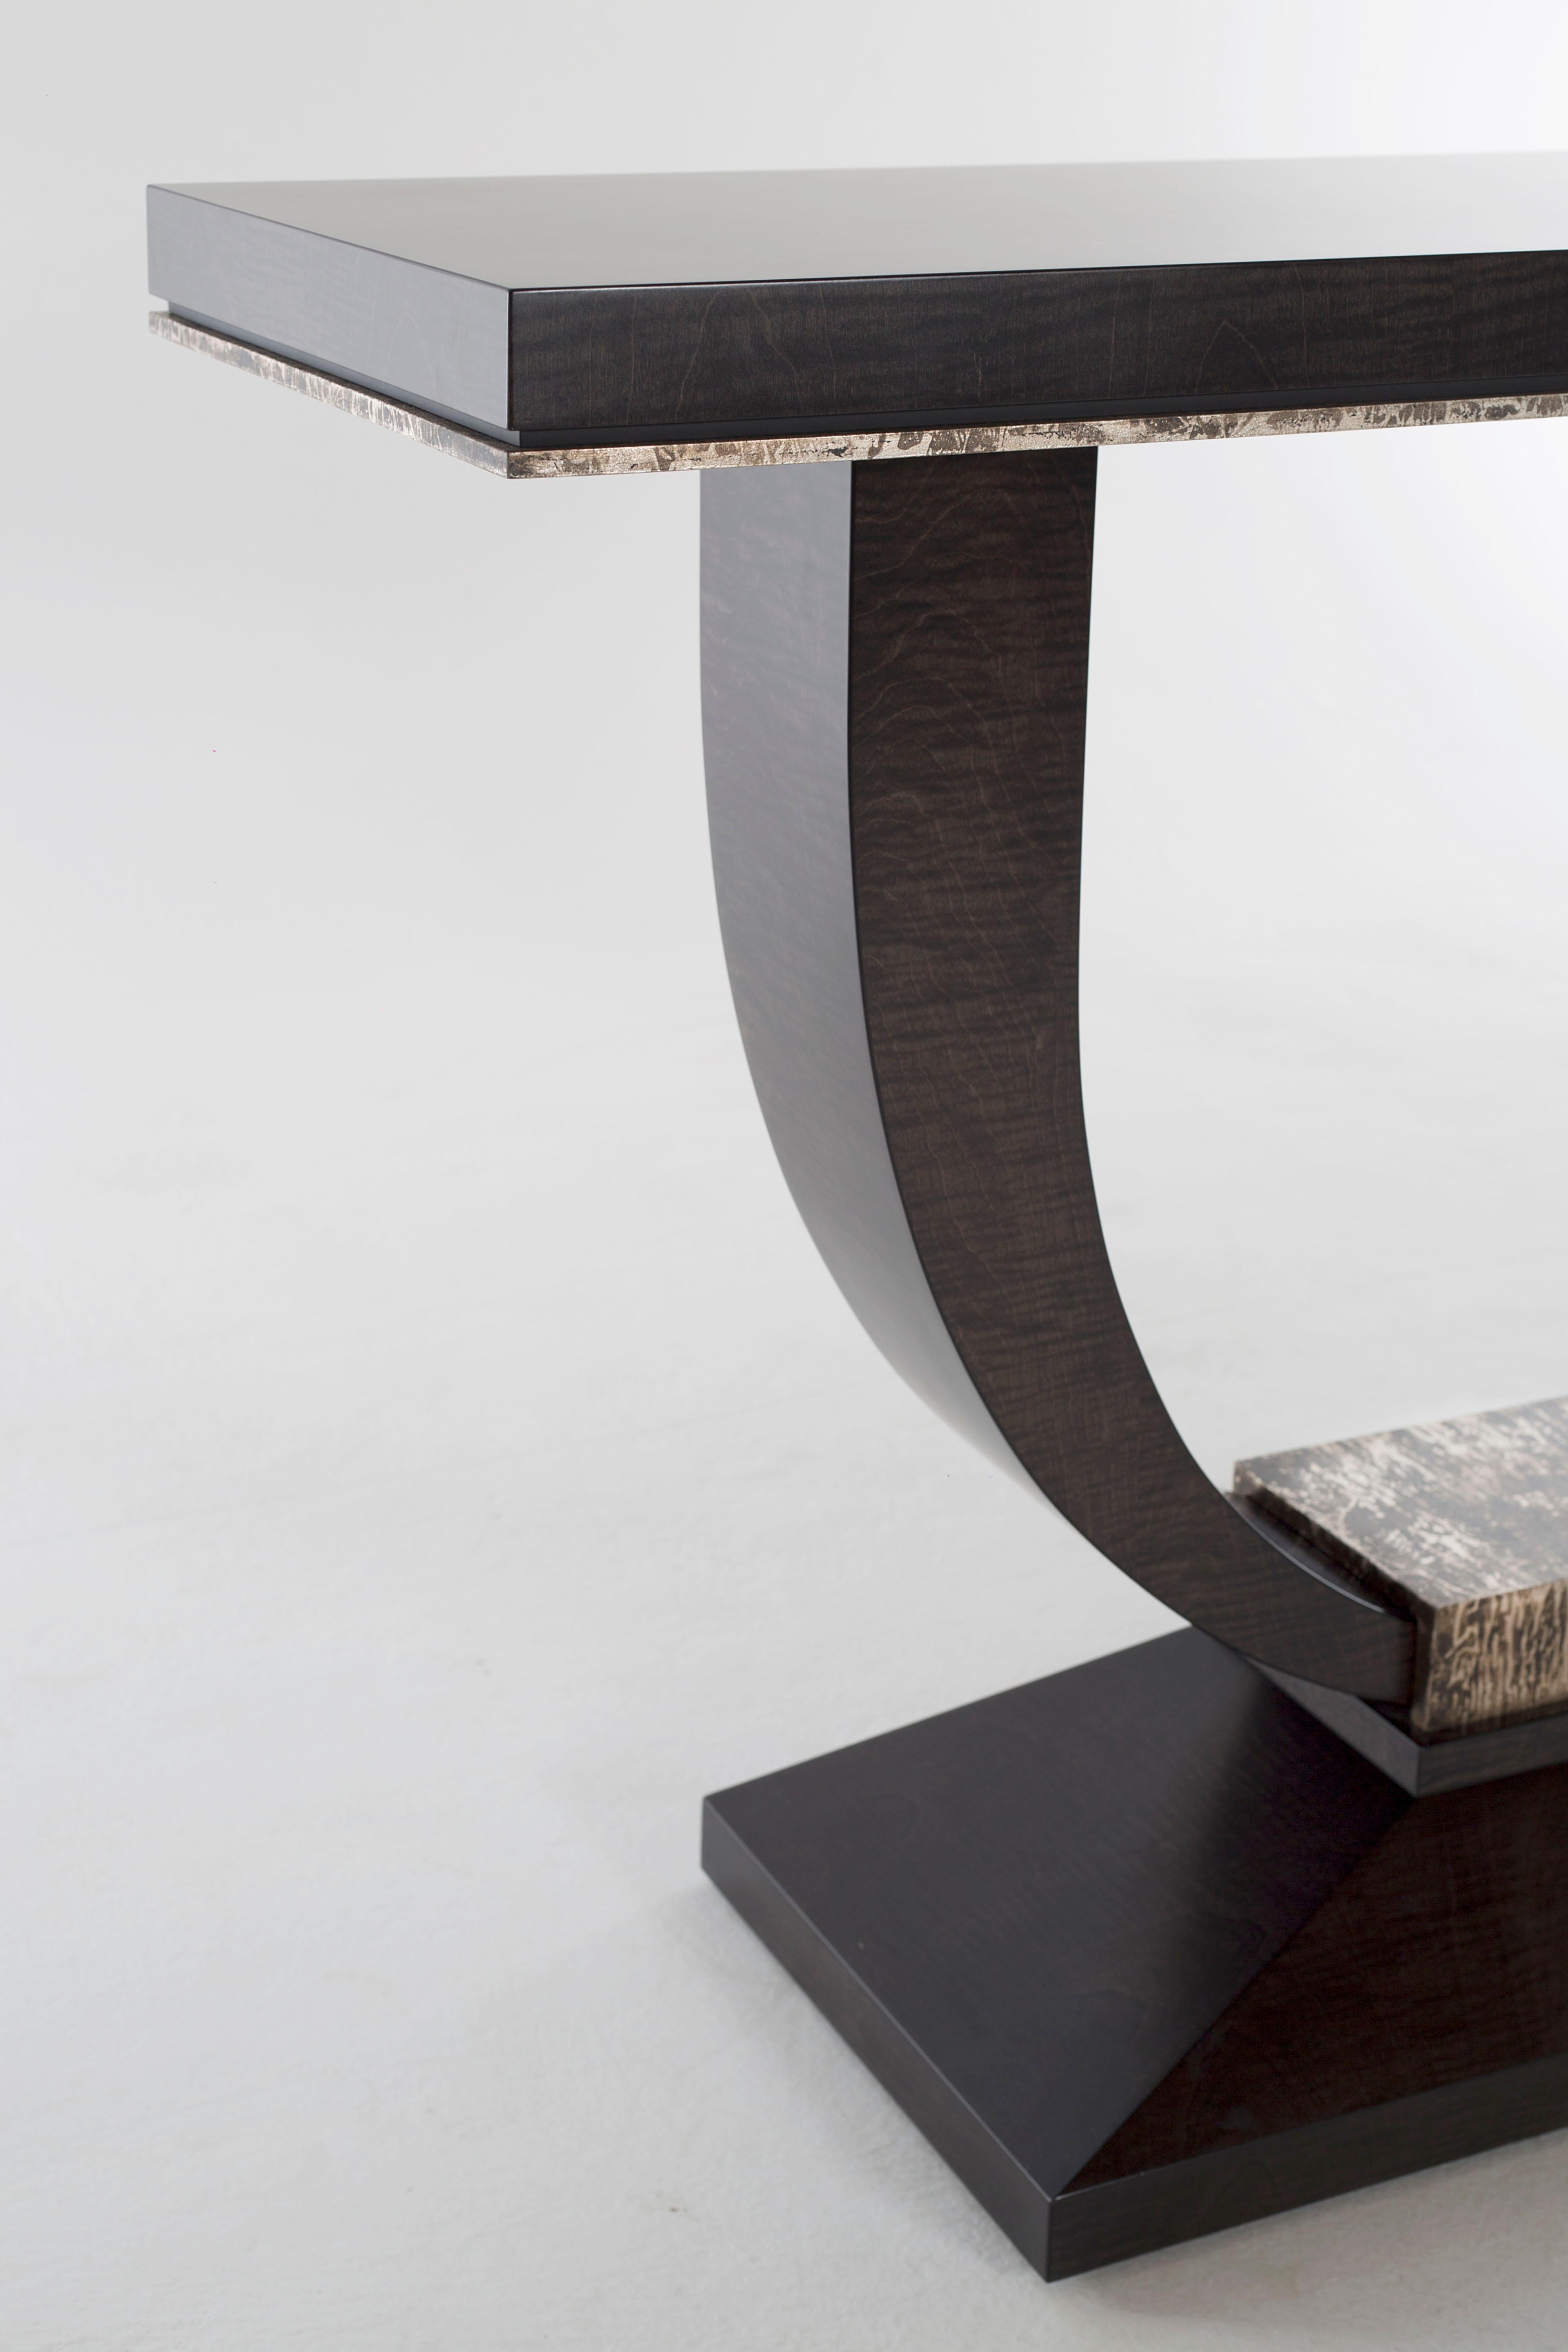 Contemporary Davidson's Art Deco Albany Console Table, in Sycamore Black with Polished Nickel